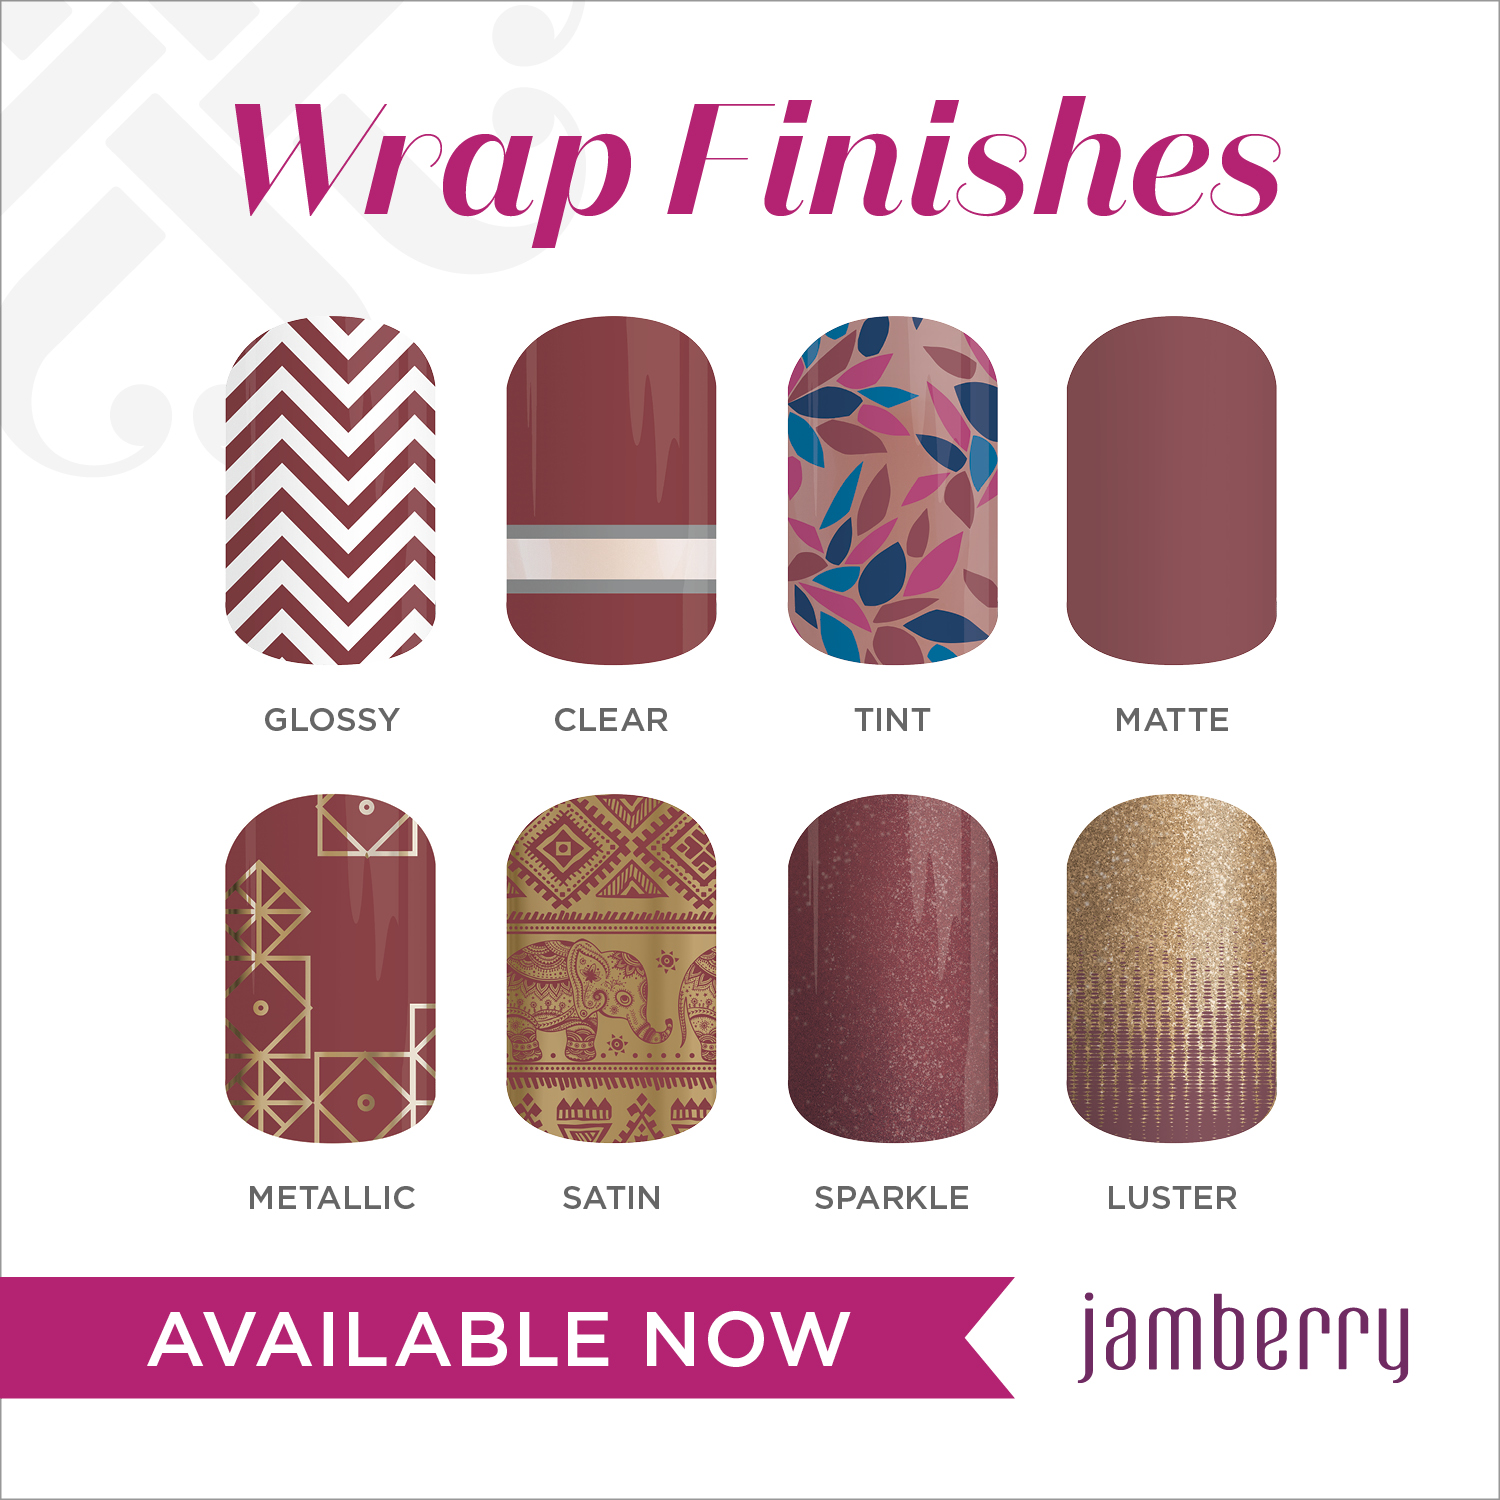 GLOW Girls : How to sign up for Jamberry in Australia or New Zealand